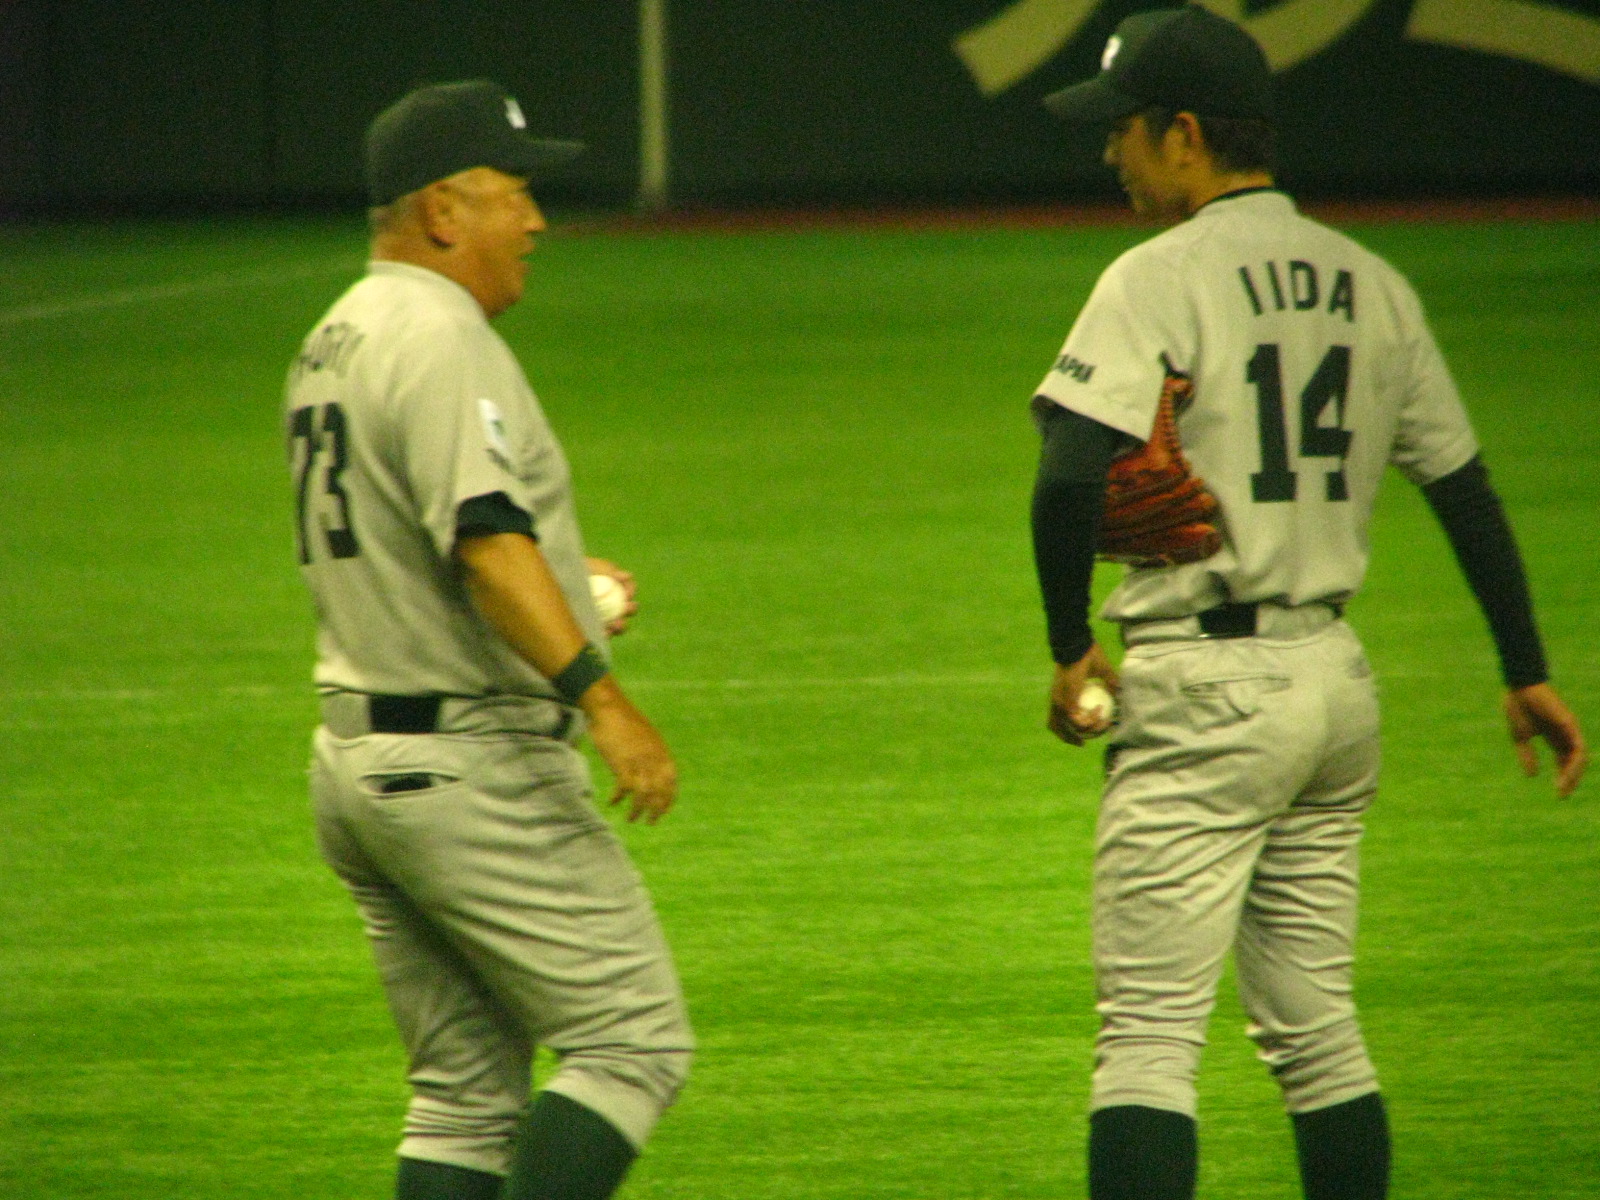 two baseball players talking on a field